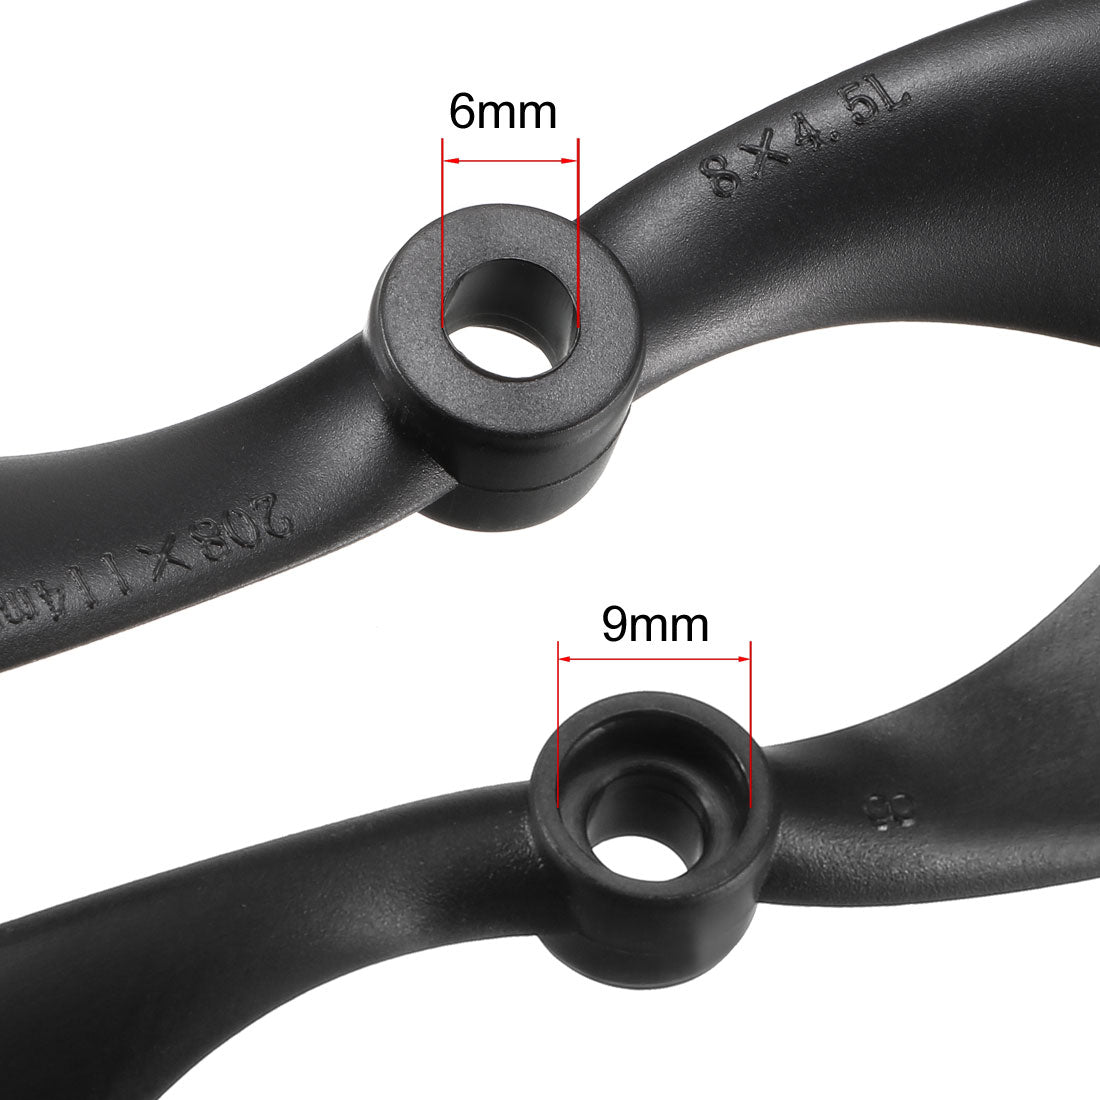 uxcell Uxcell RC Propellers  C 8045 8x4.5 Inch 2-Vane Fixed-Wing for Airplane Toy, Nylon Black 4 Pairs with Adapter Rings